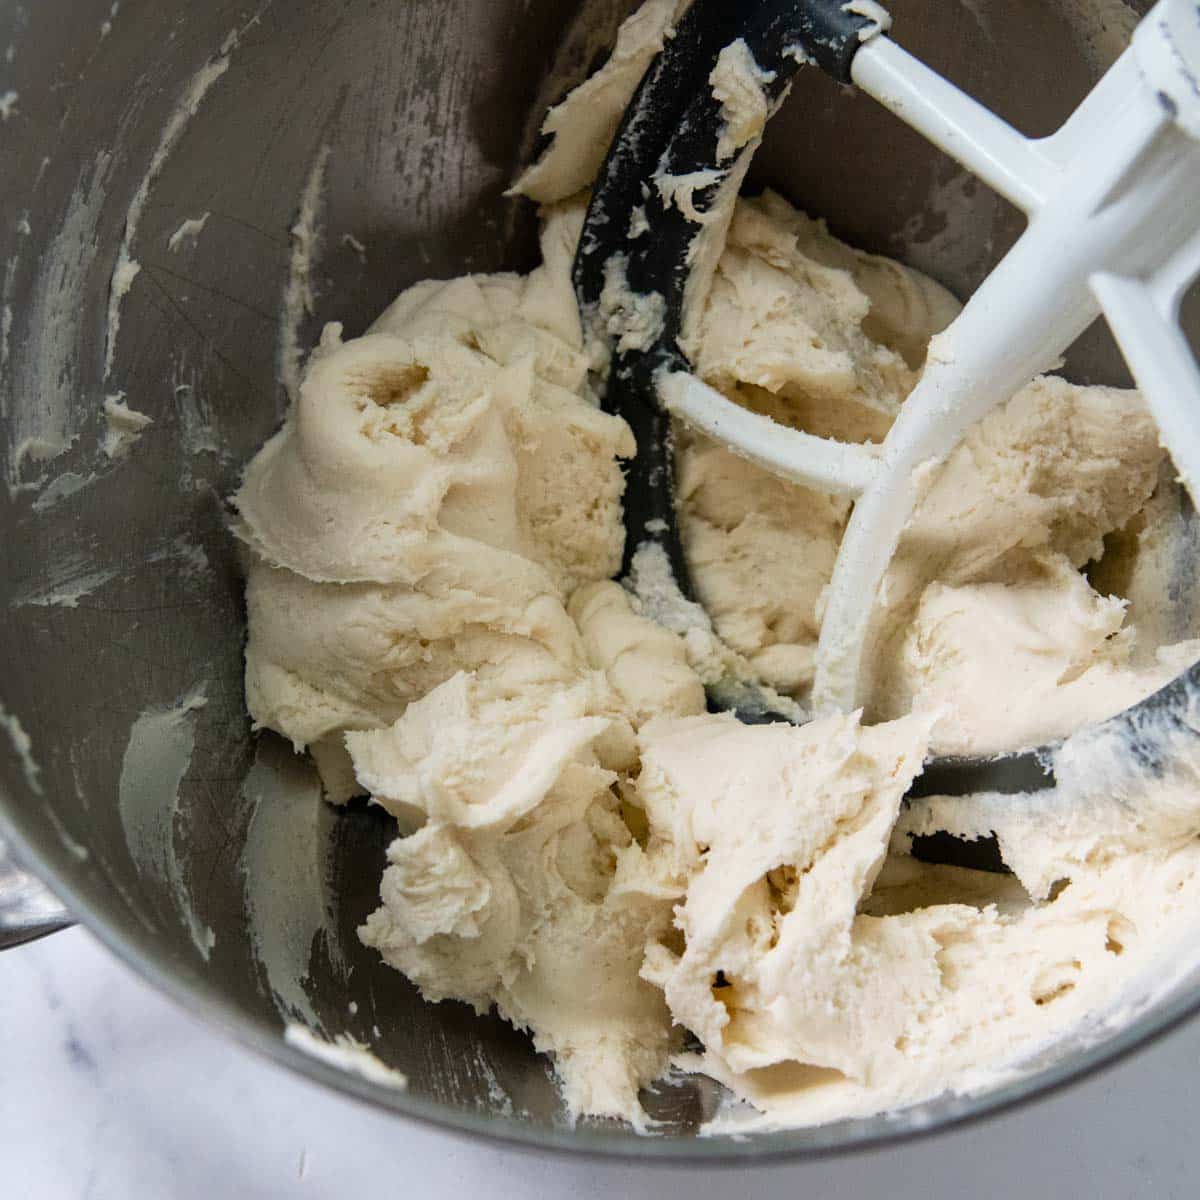 the dough after it is mixed together.